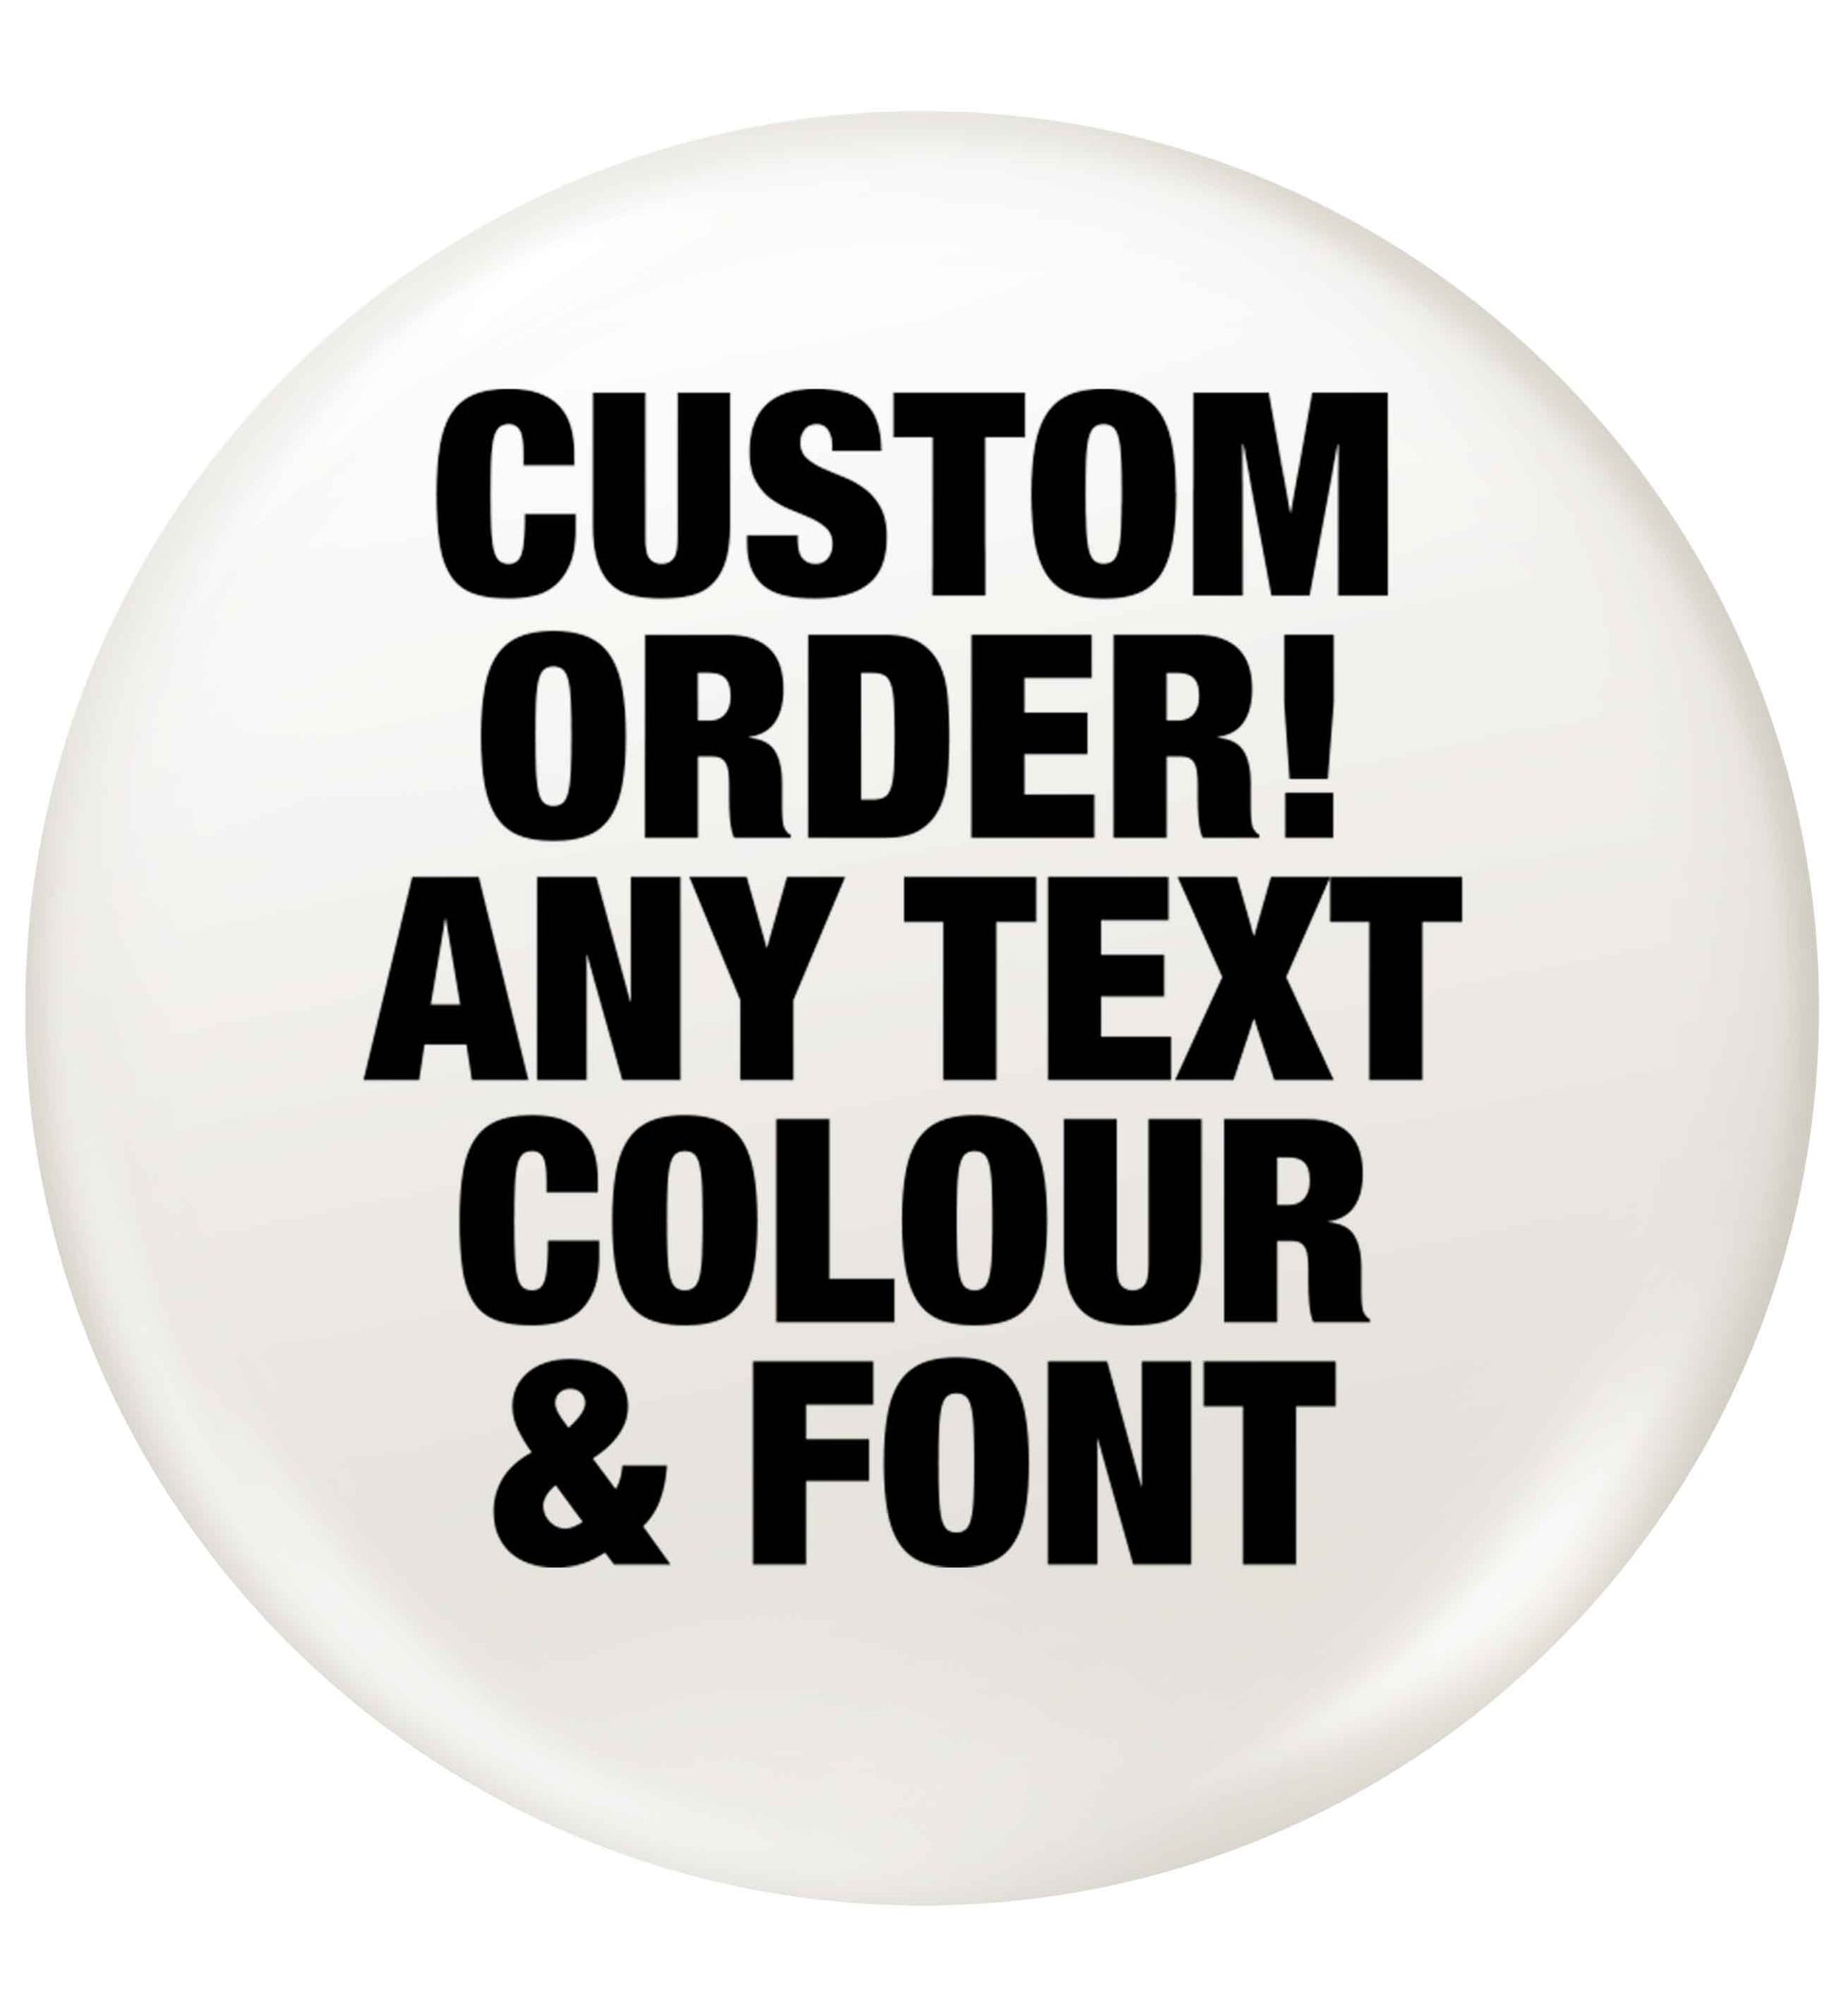 Custom order any text colour and font small 25mm Pin badge